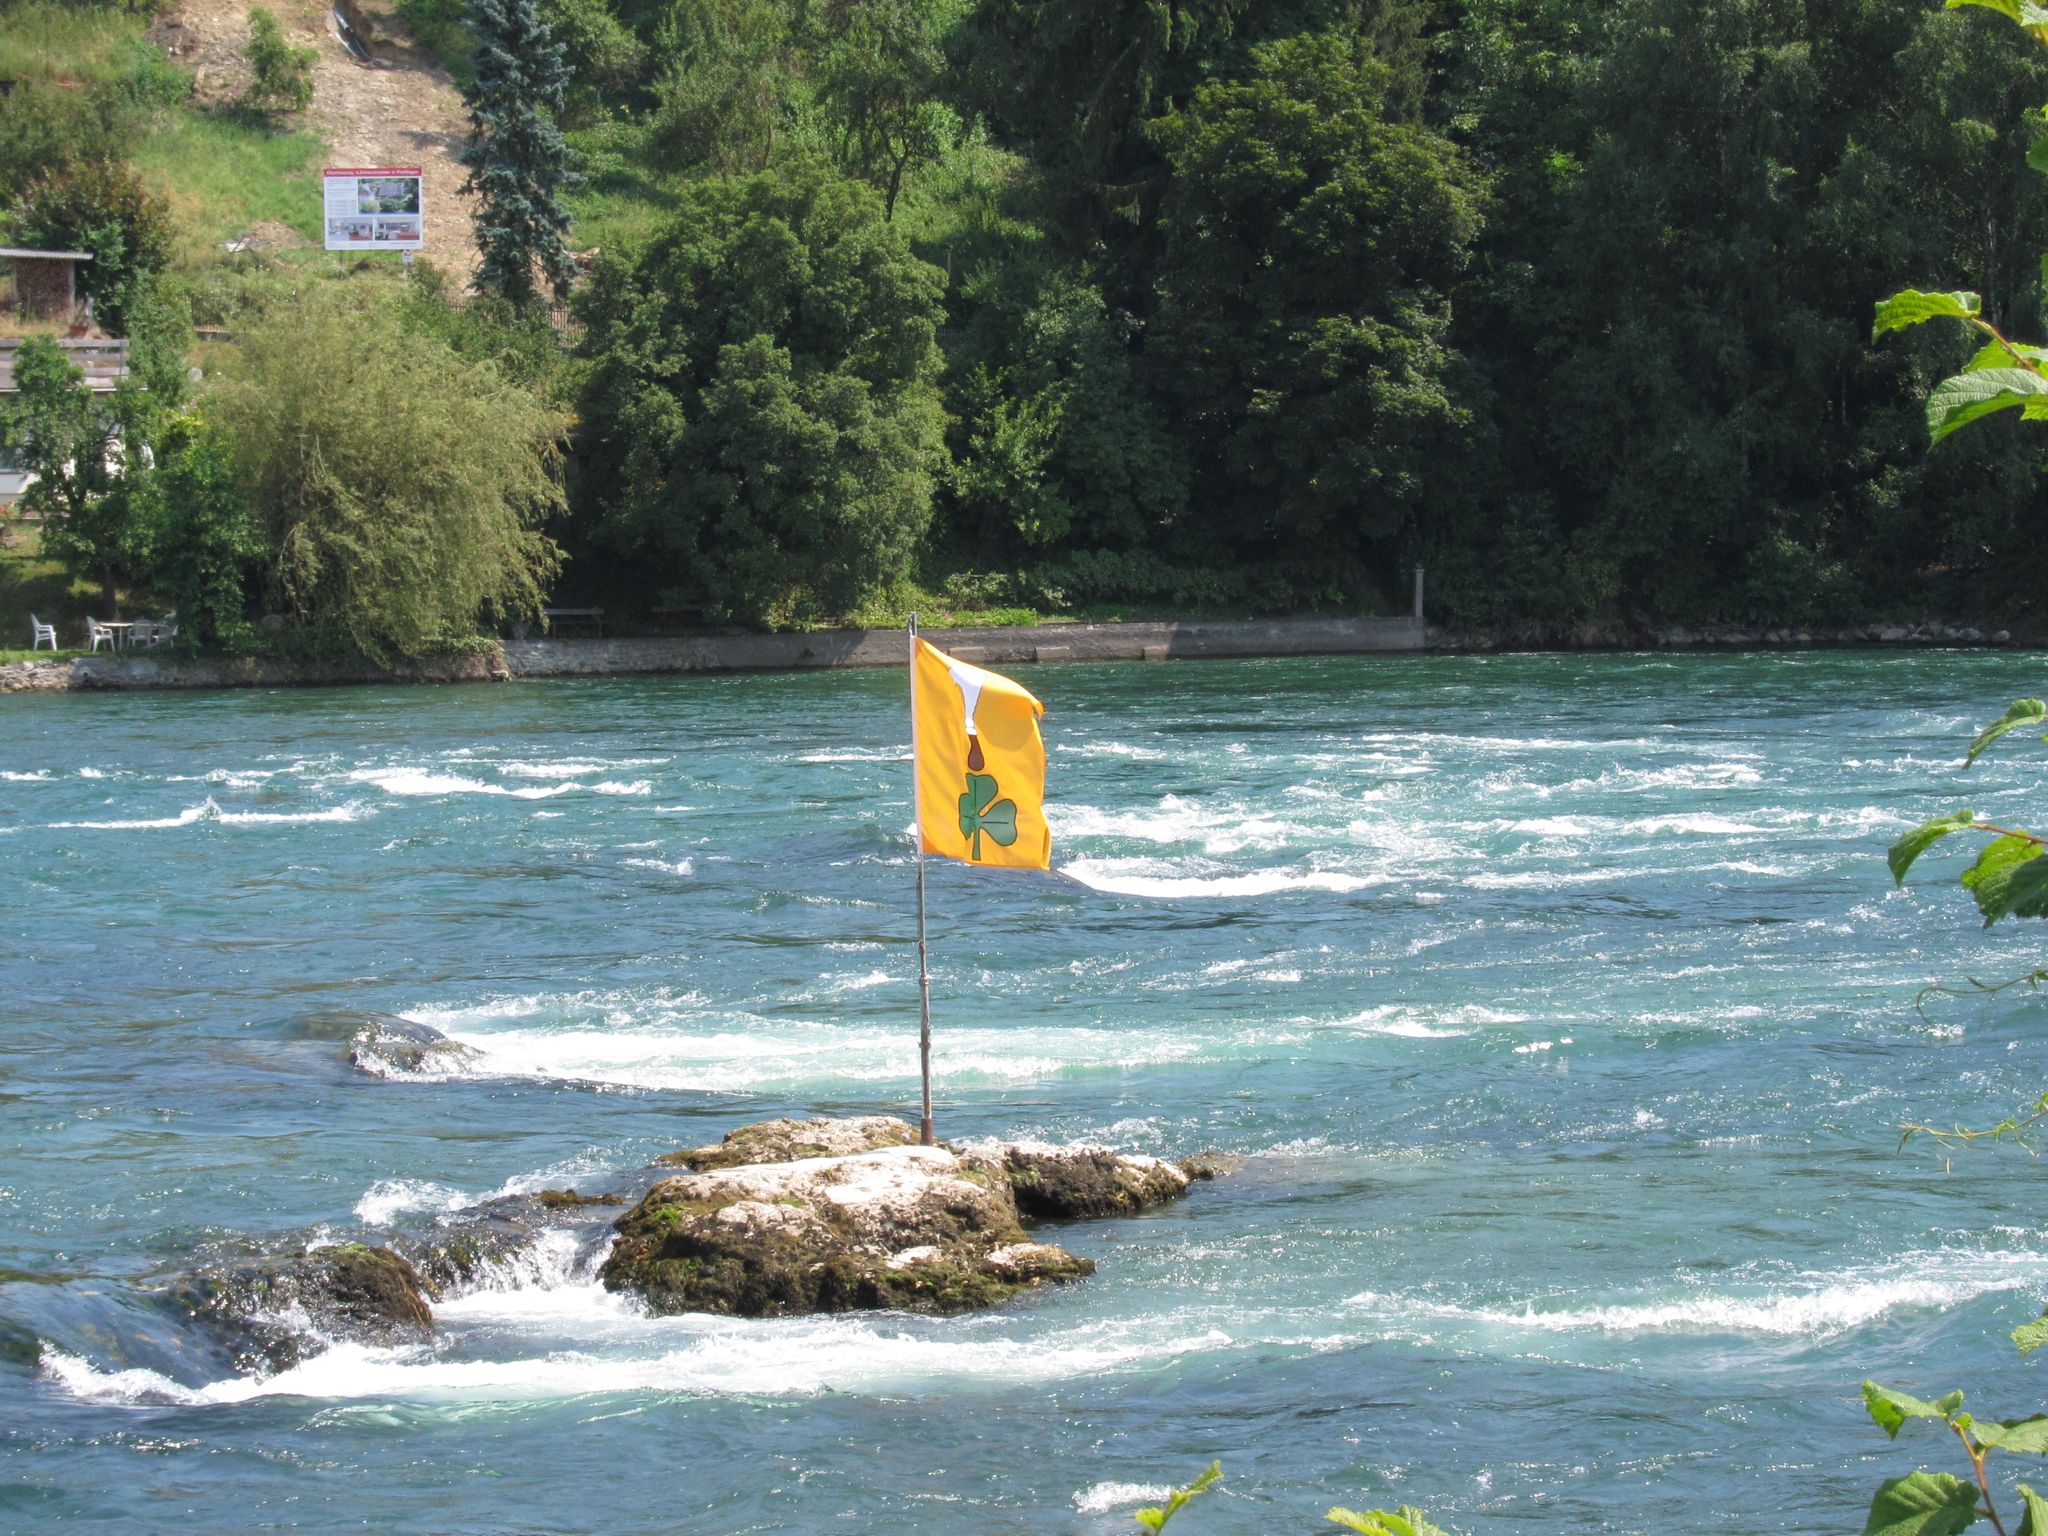 Photo 22 of 22 from the album Rheinfall.